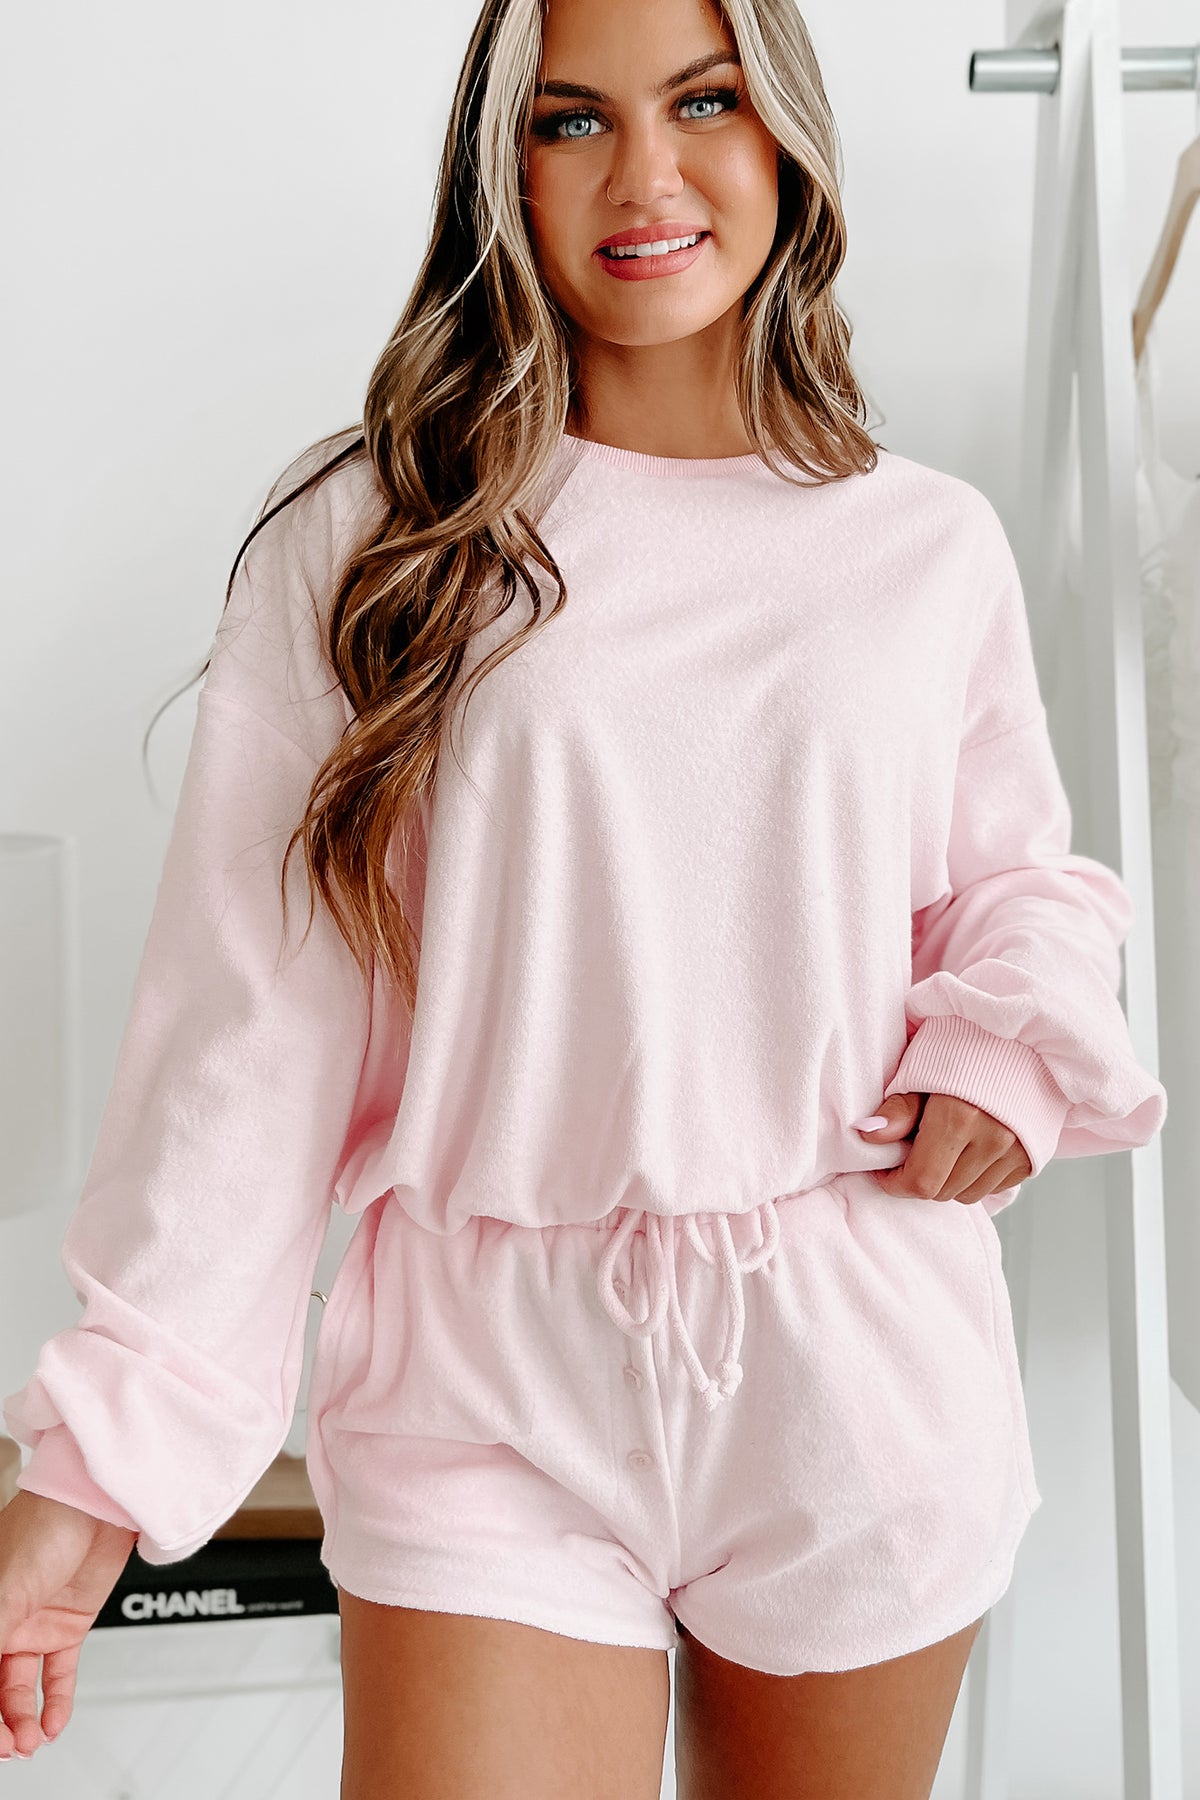 Cozy State Shorts Knit Sweet (Light for & the lower Terry Sweatshirt Set cost Get Pink) Generis Look